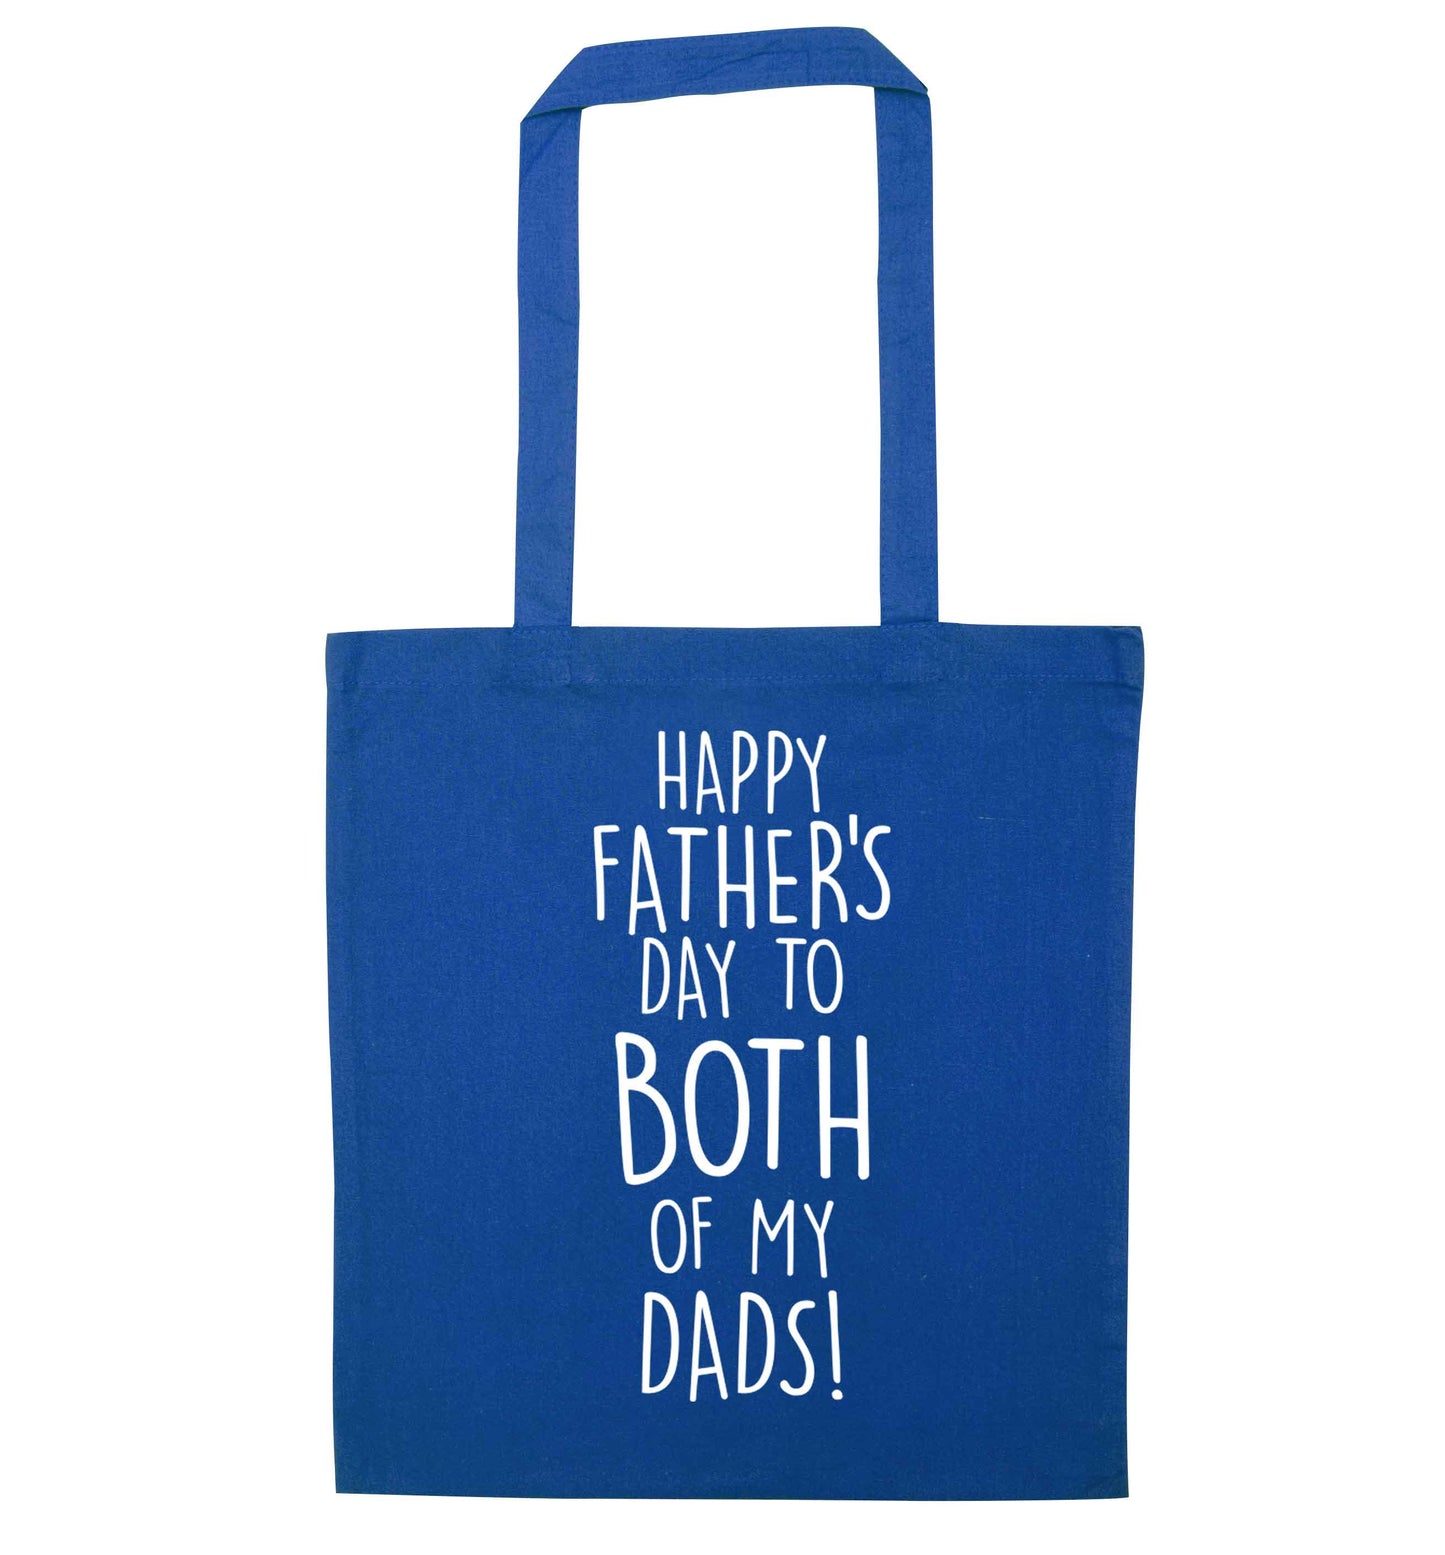 Happy Father's day to both of my dads blue tote bag